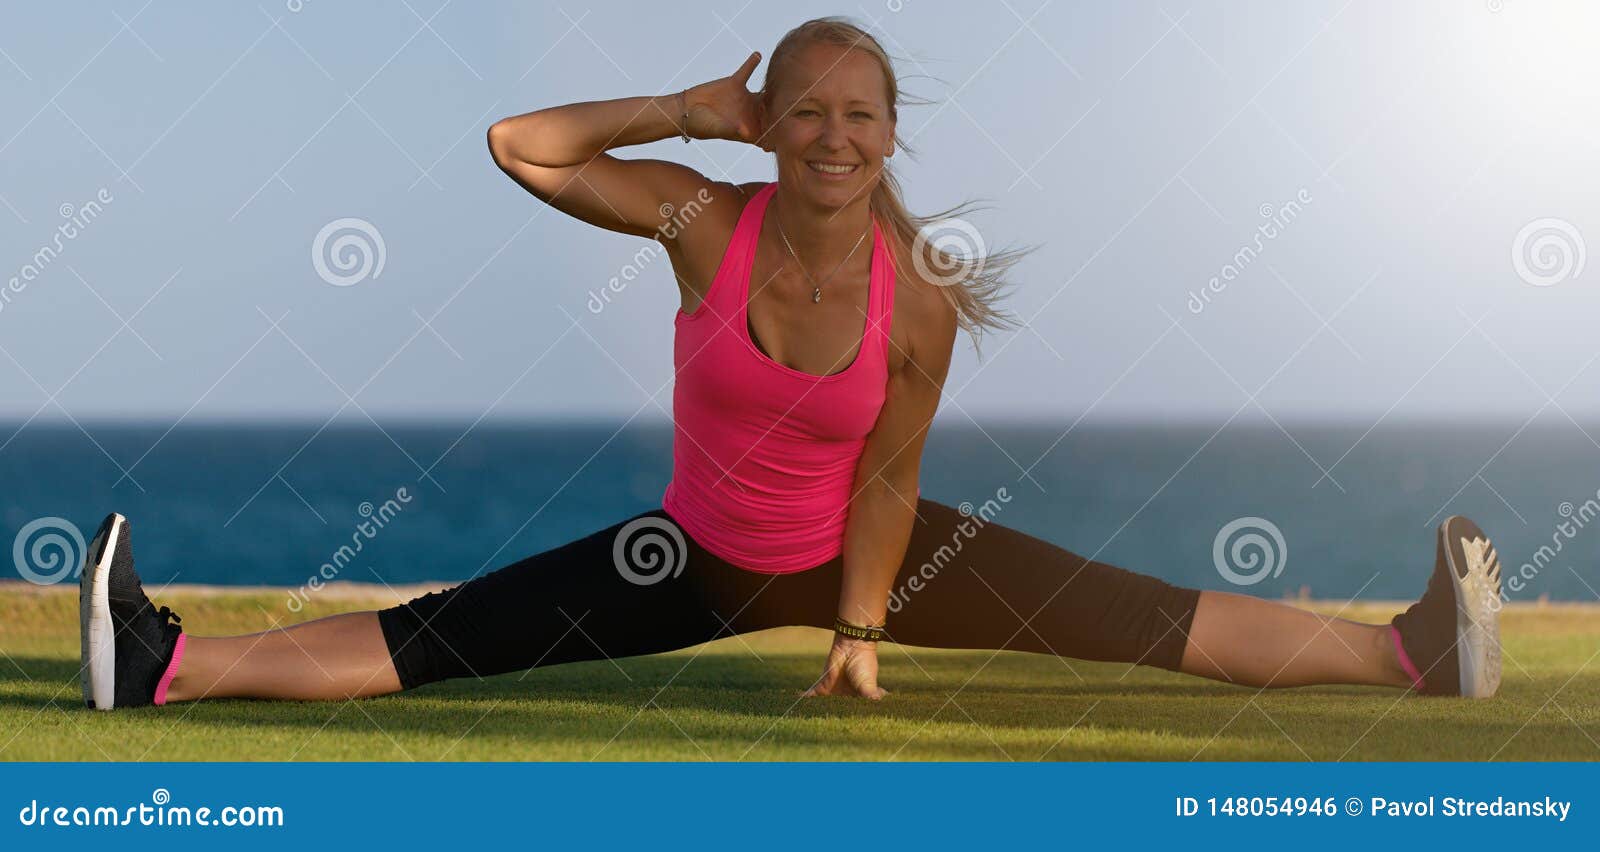 Sportswear, adult: Gymnast of Female in Does in 148054946 Poses on Image Grass Stock - cross, Sits Yoga Leg Split, Photo on Coast, Ocean